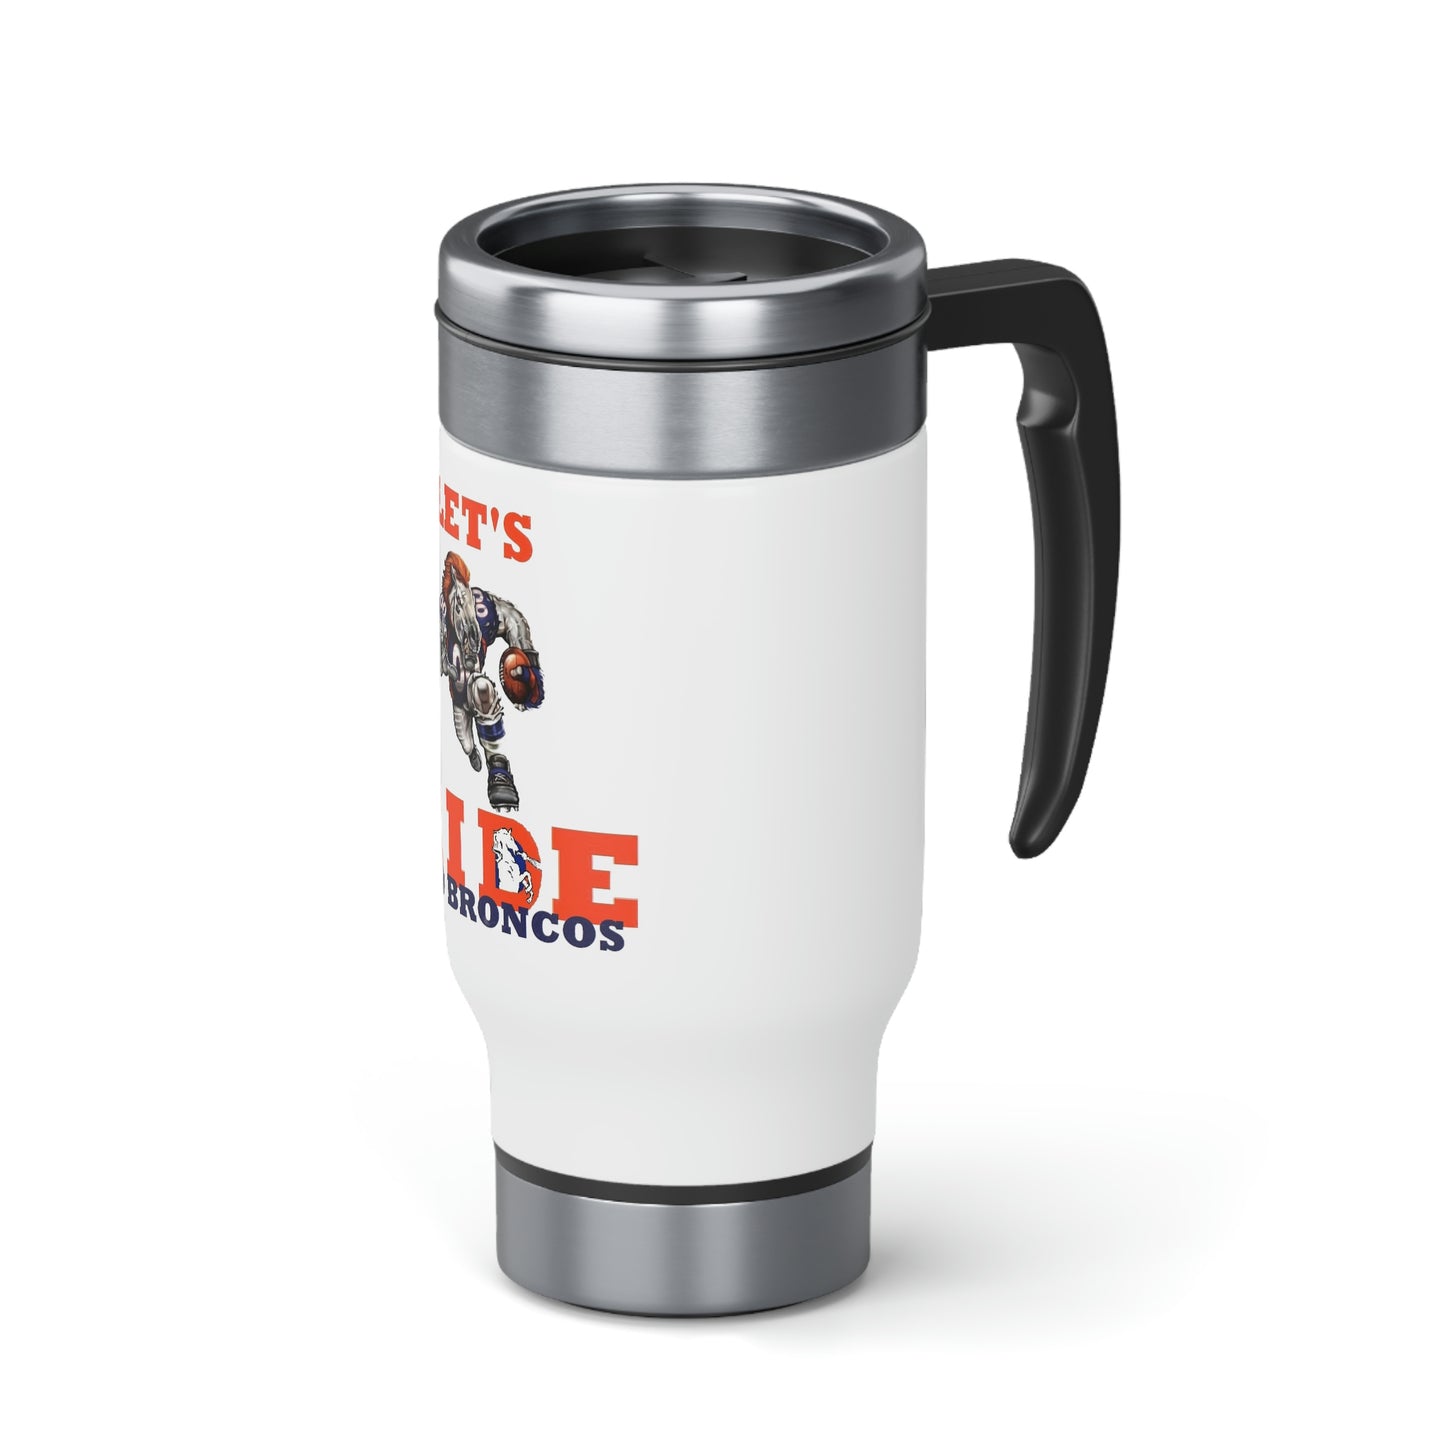 Denver Bronco's Lets Ride Stainless Steel Travel Mug with Handle, 14oz